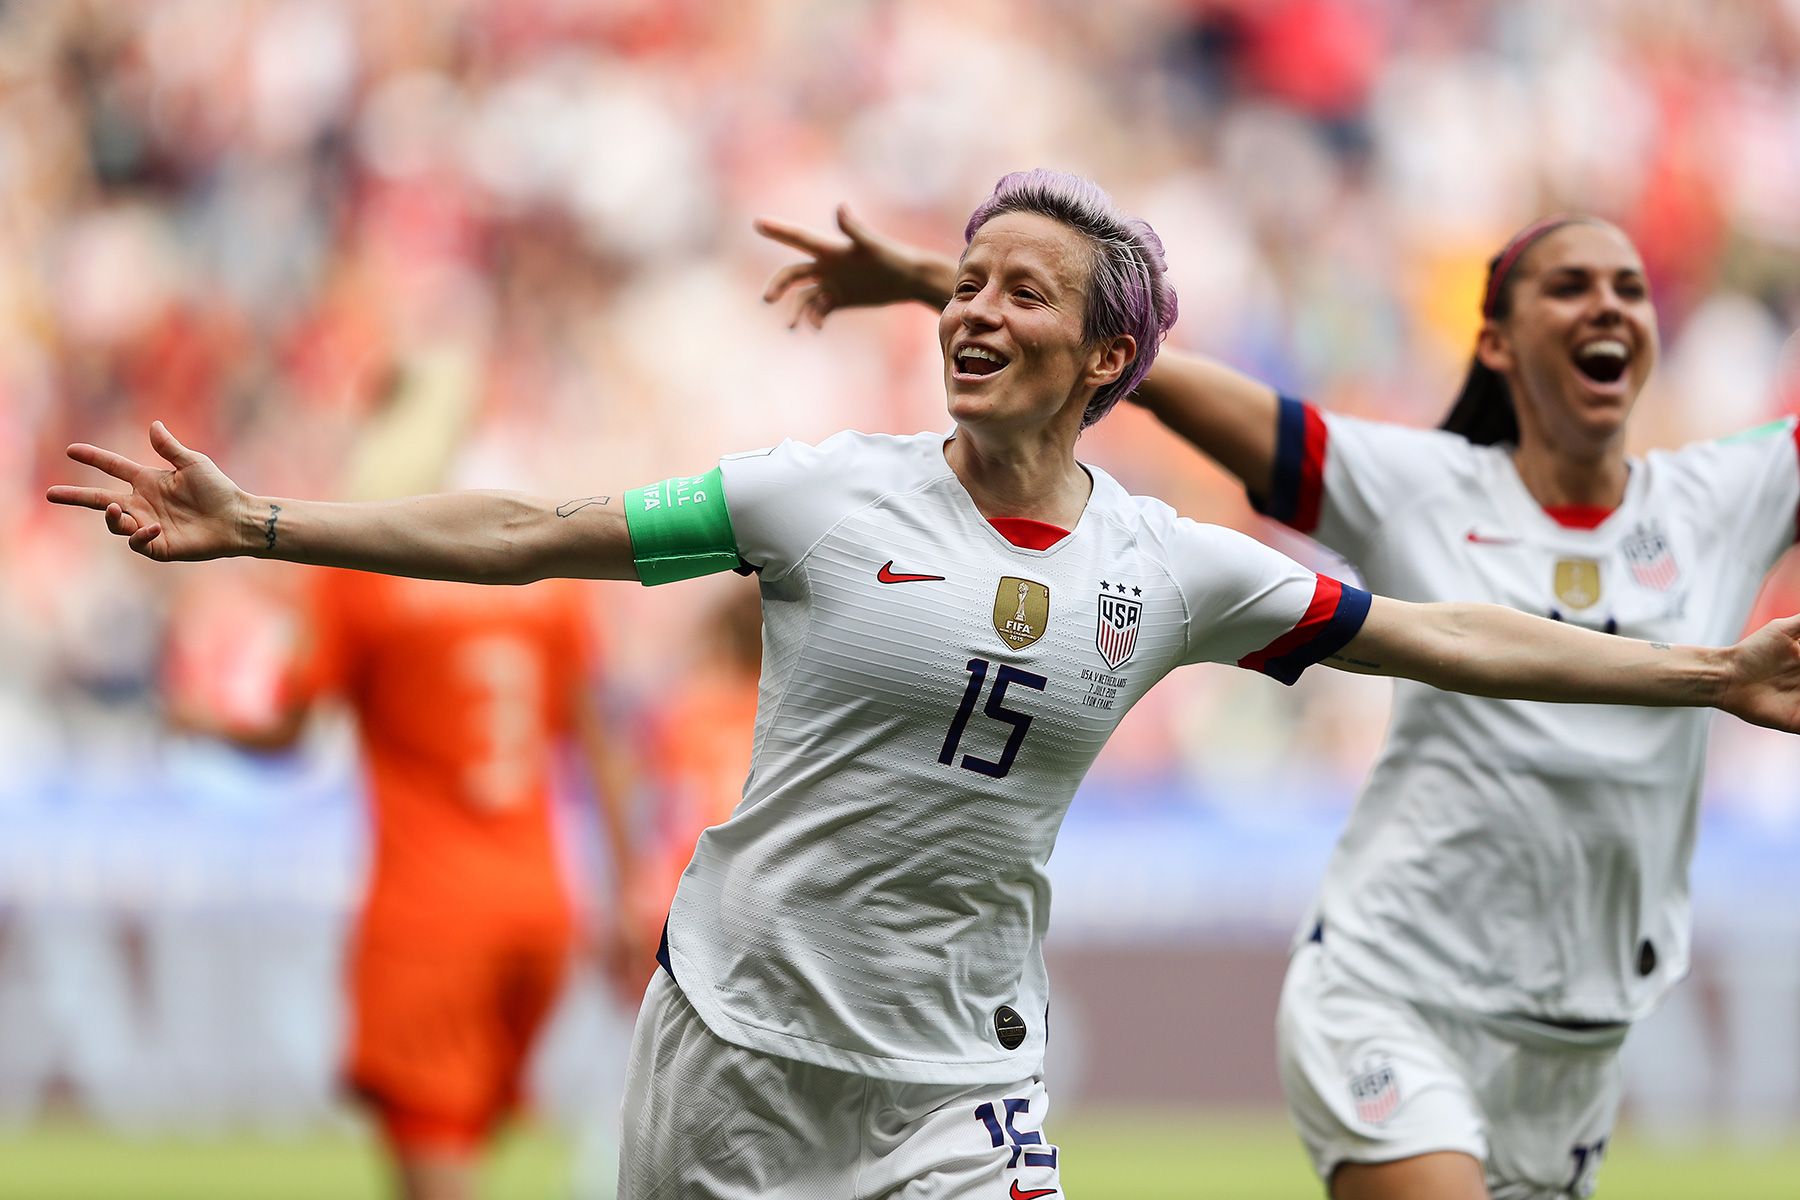 Megan Rapinoe celebrates the goal of the final of the World-wide